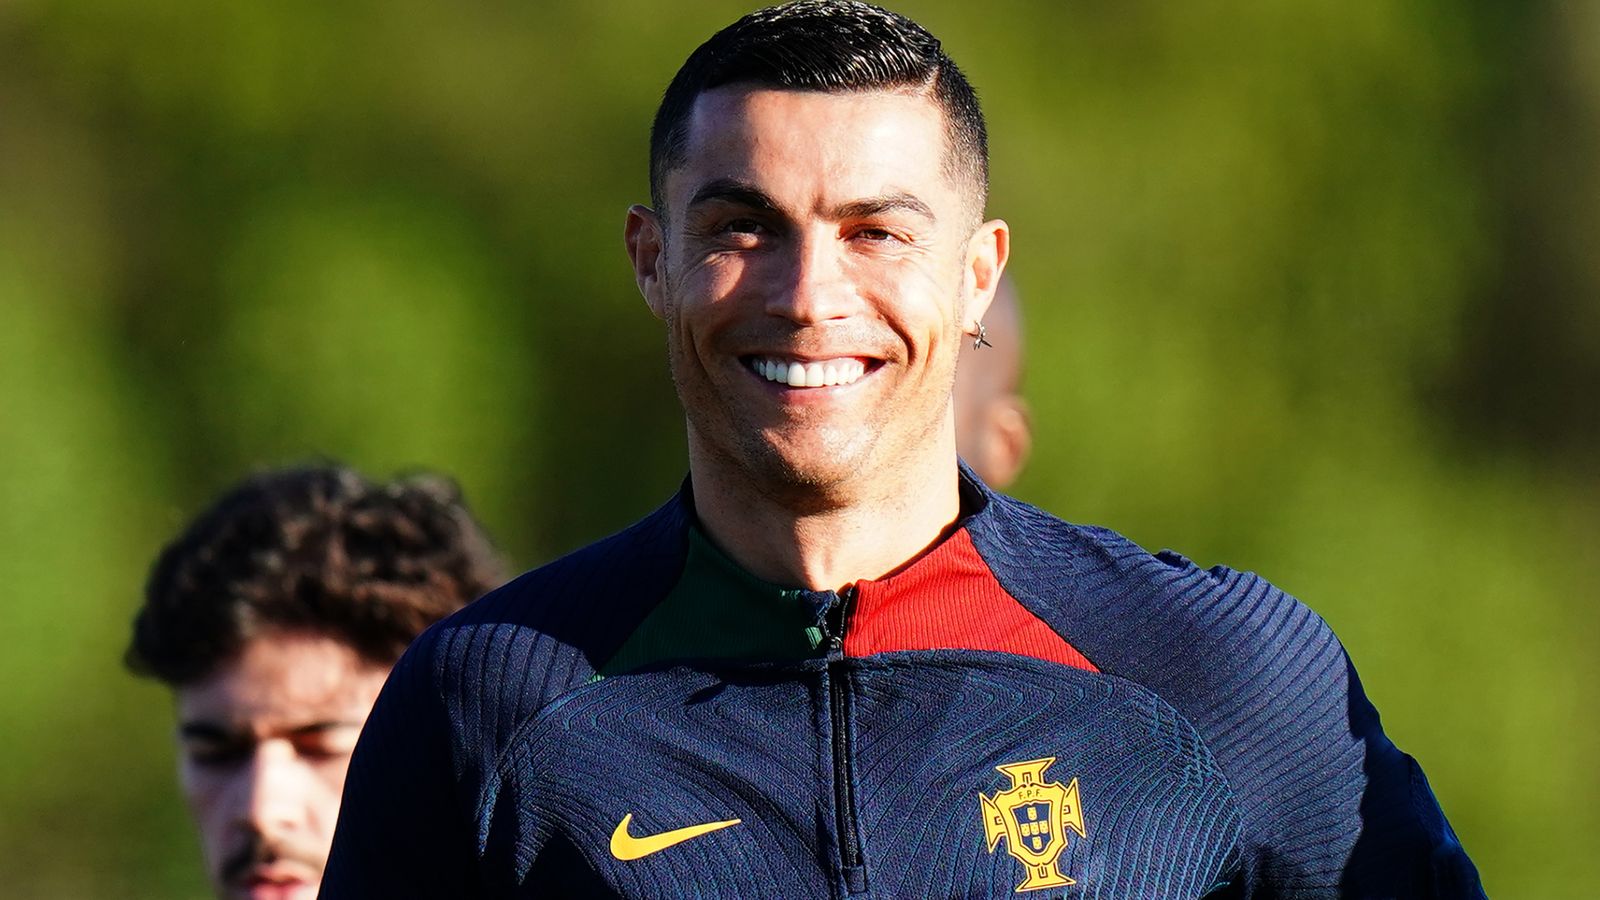 He's a guy that': Cristiano Ronaldo opens up about his long